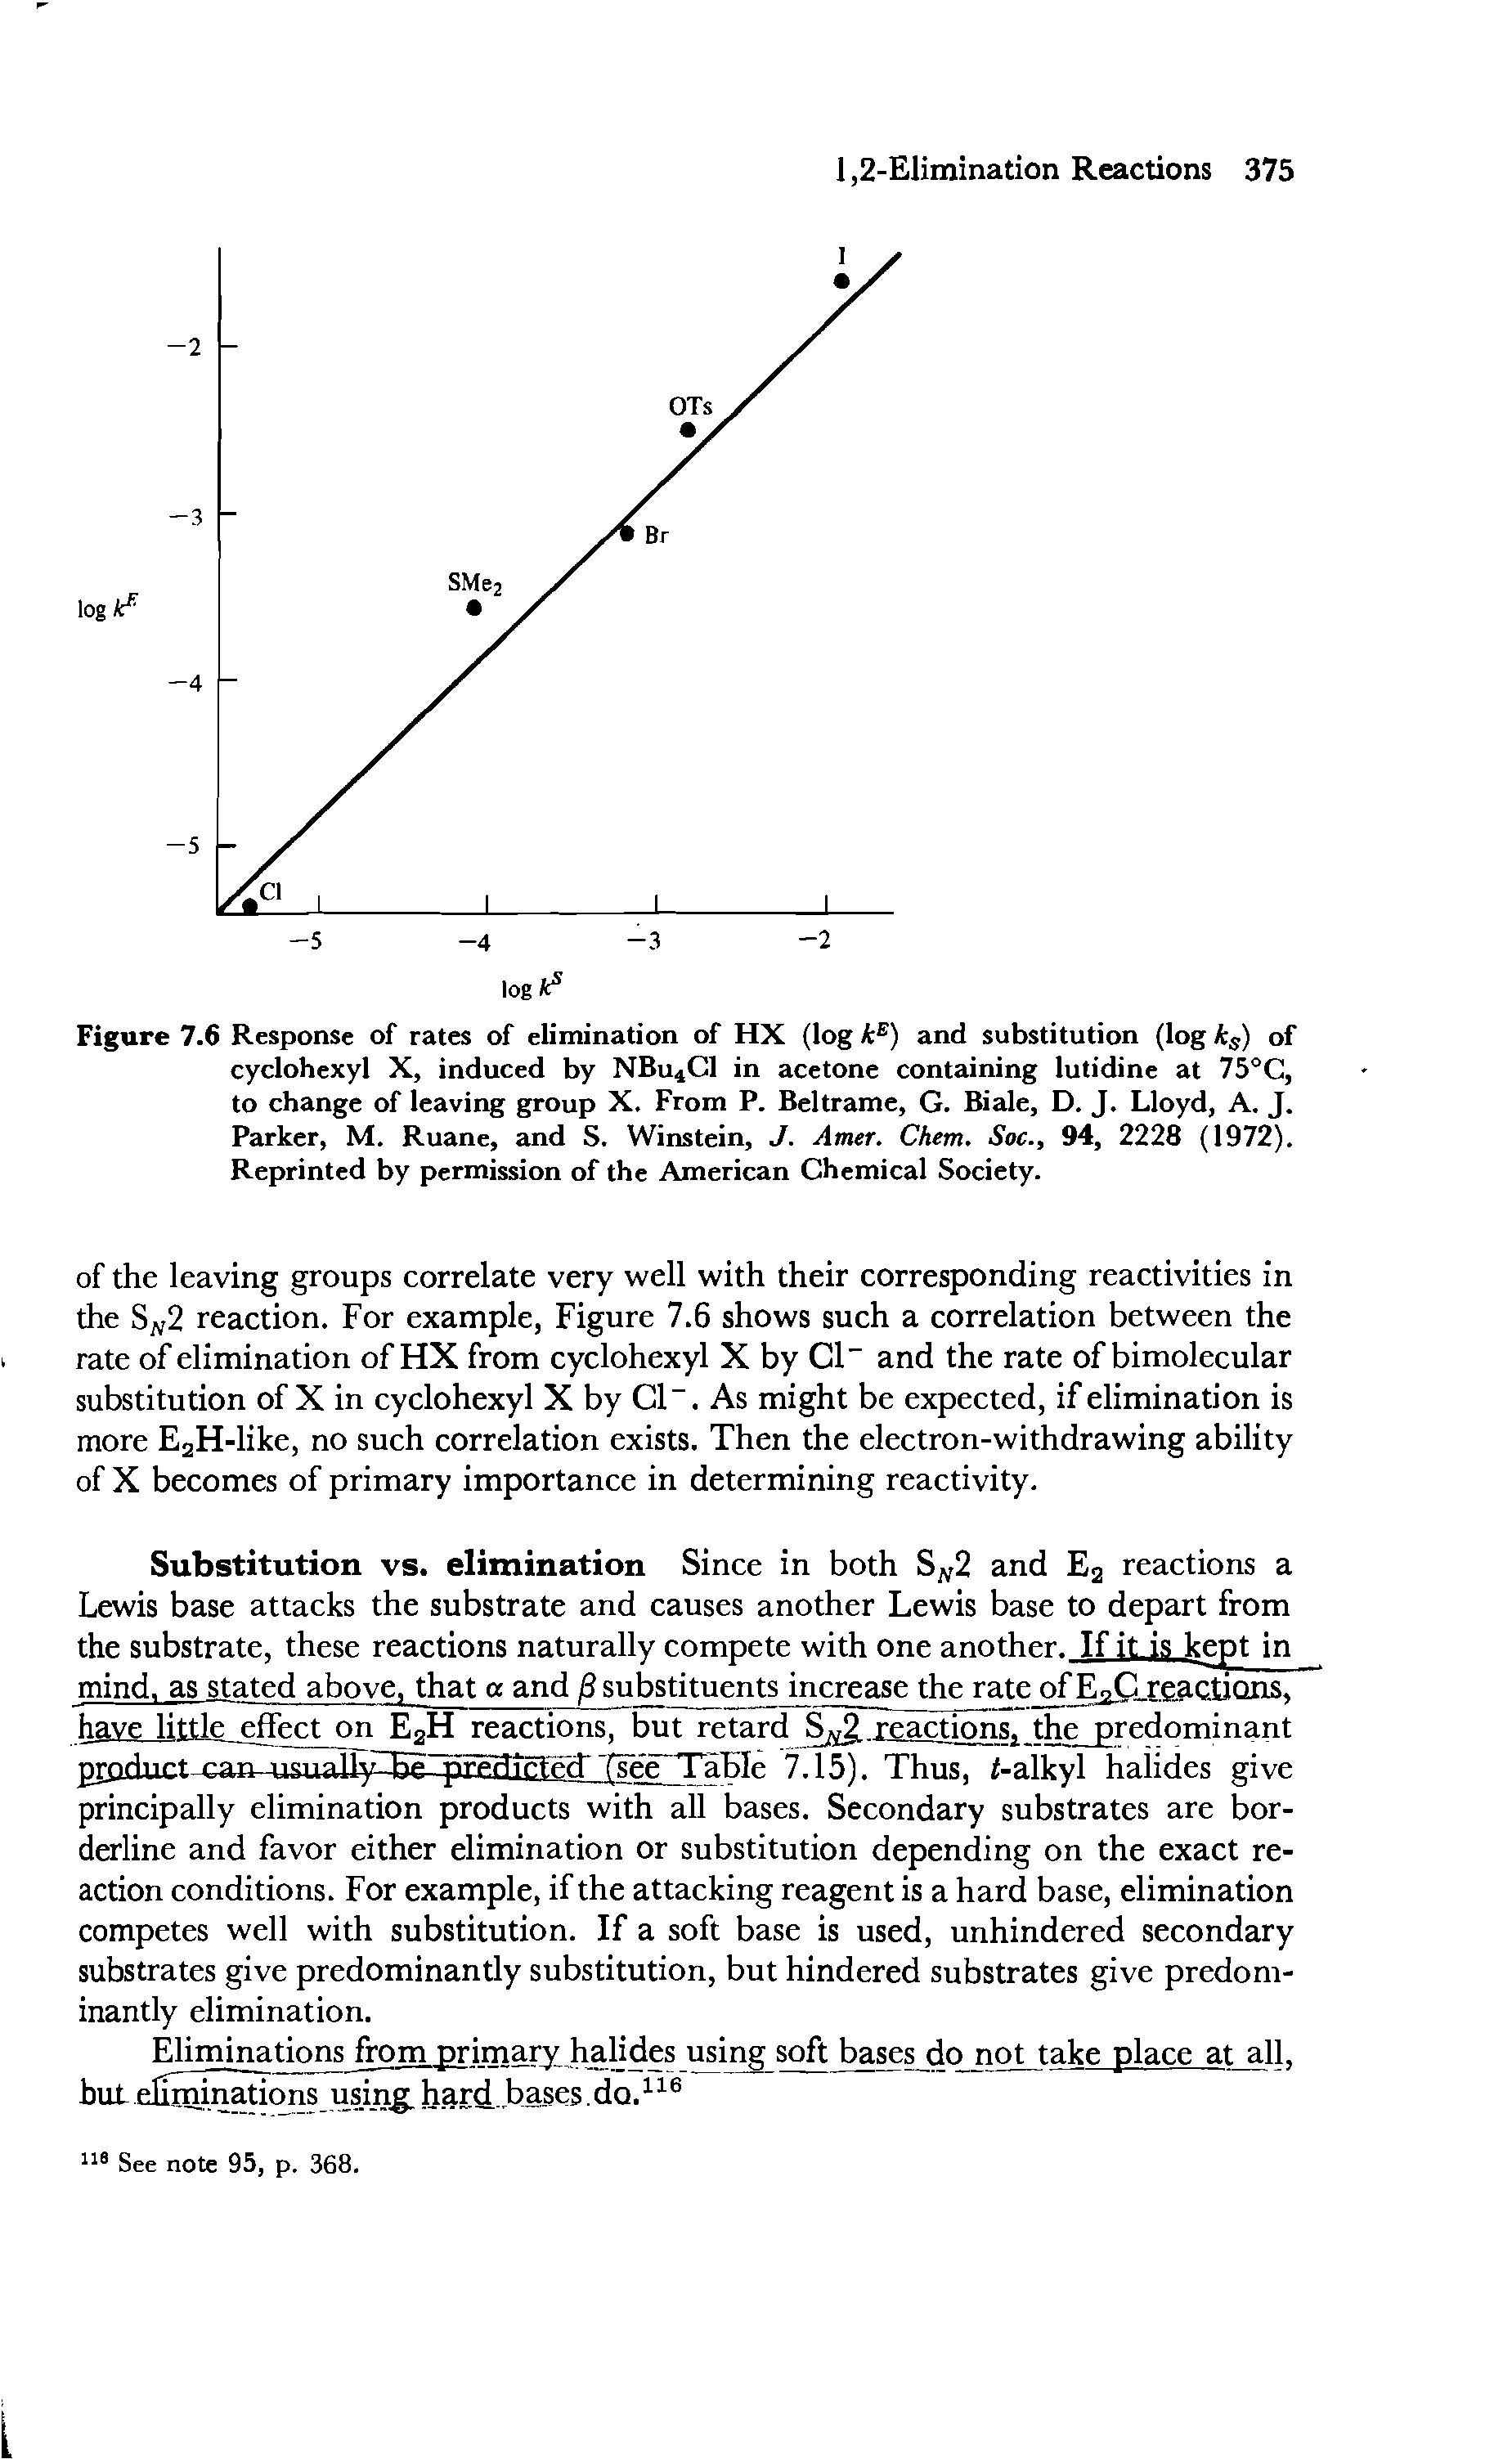 Figure 7.6 Response of rates of elimination of HX (log kE) and substitution (log ks) of cyclohexyl X, induced by NBu4C1 in acetone containing lutidine at 75°C, to change of leaving group X. From P. Beltrame, G. Biale, D. J. Lloyd, A. J. Parker, M. Ruane, and S. Winstein, J. Amer. Chem. Soc., 94, 2228 (1972). Reprinted by permission of the American Chemical Society.